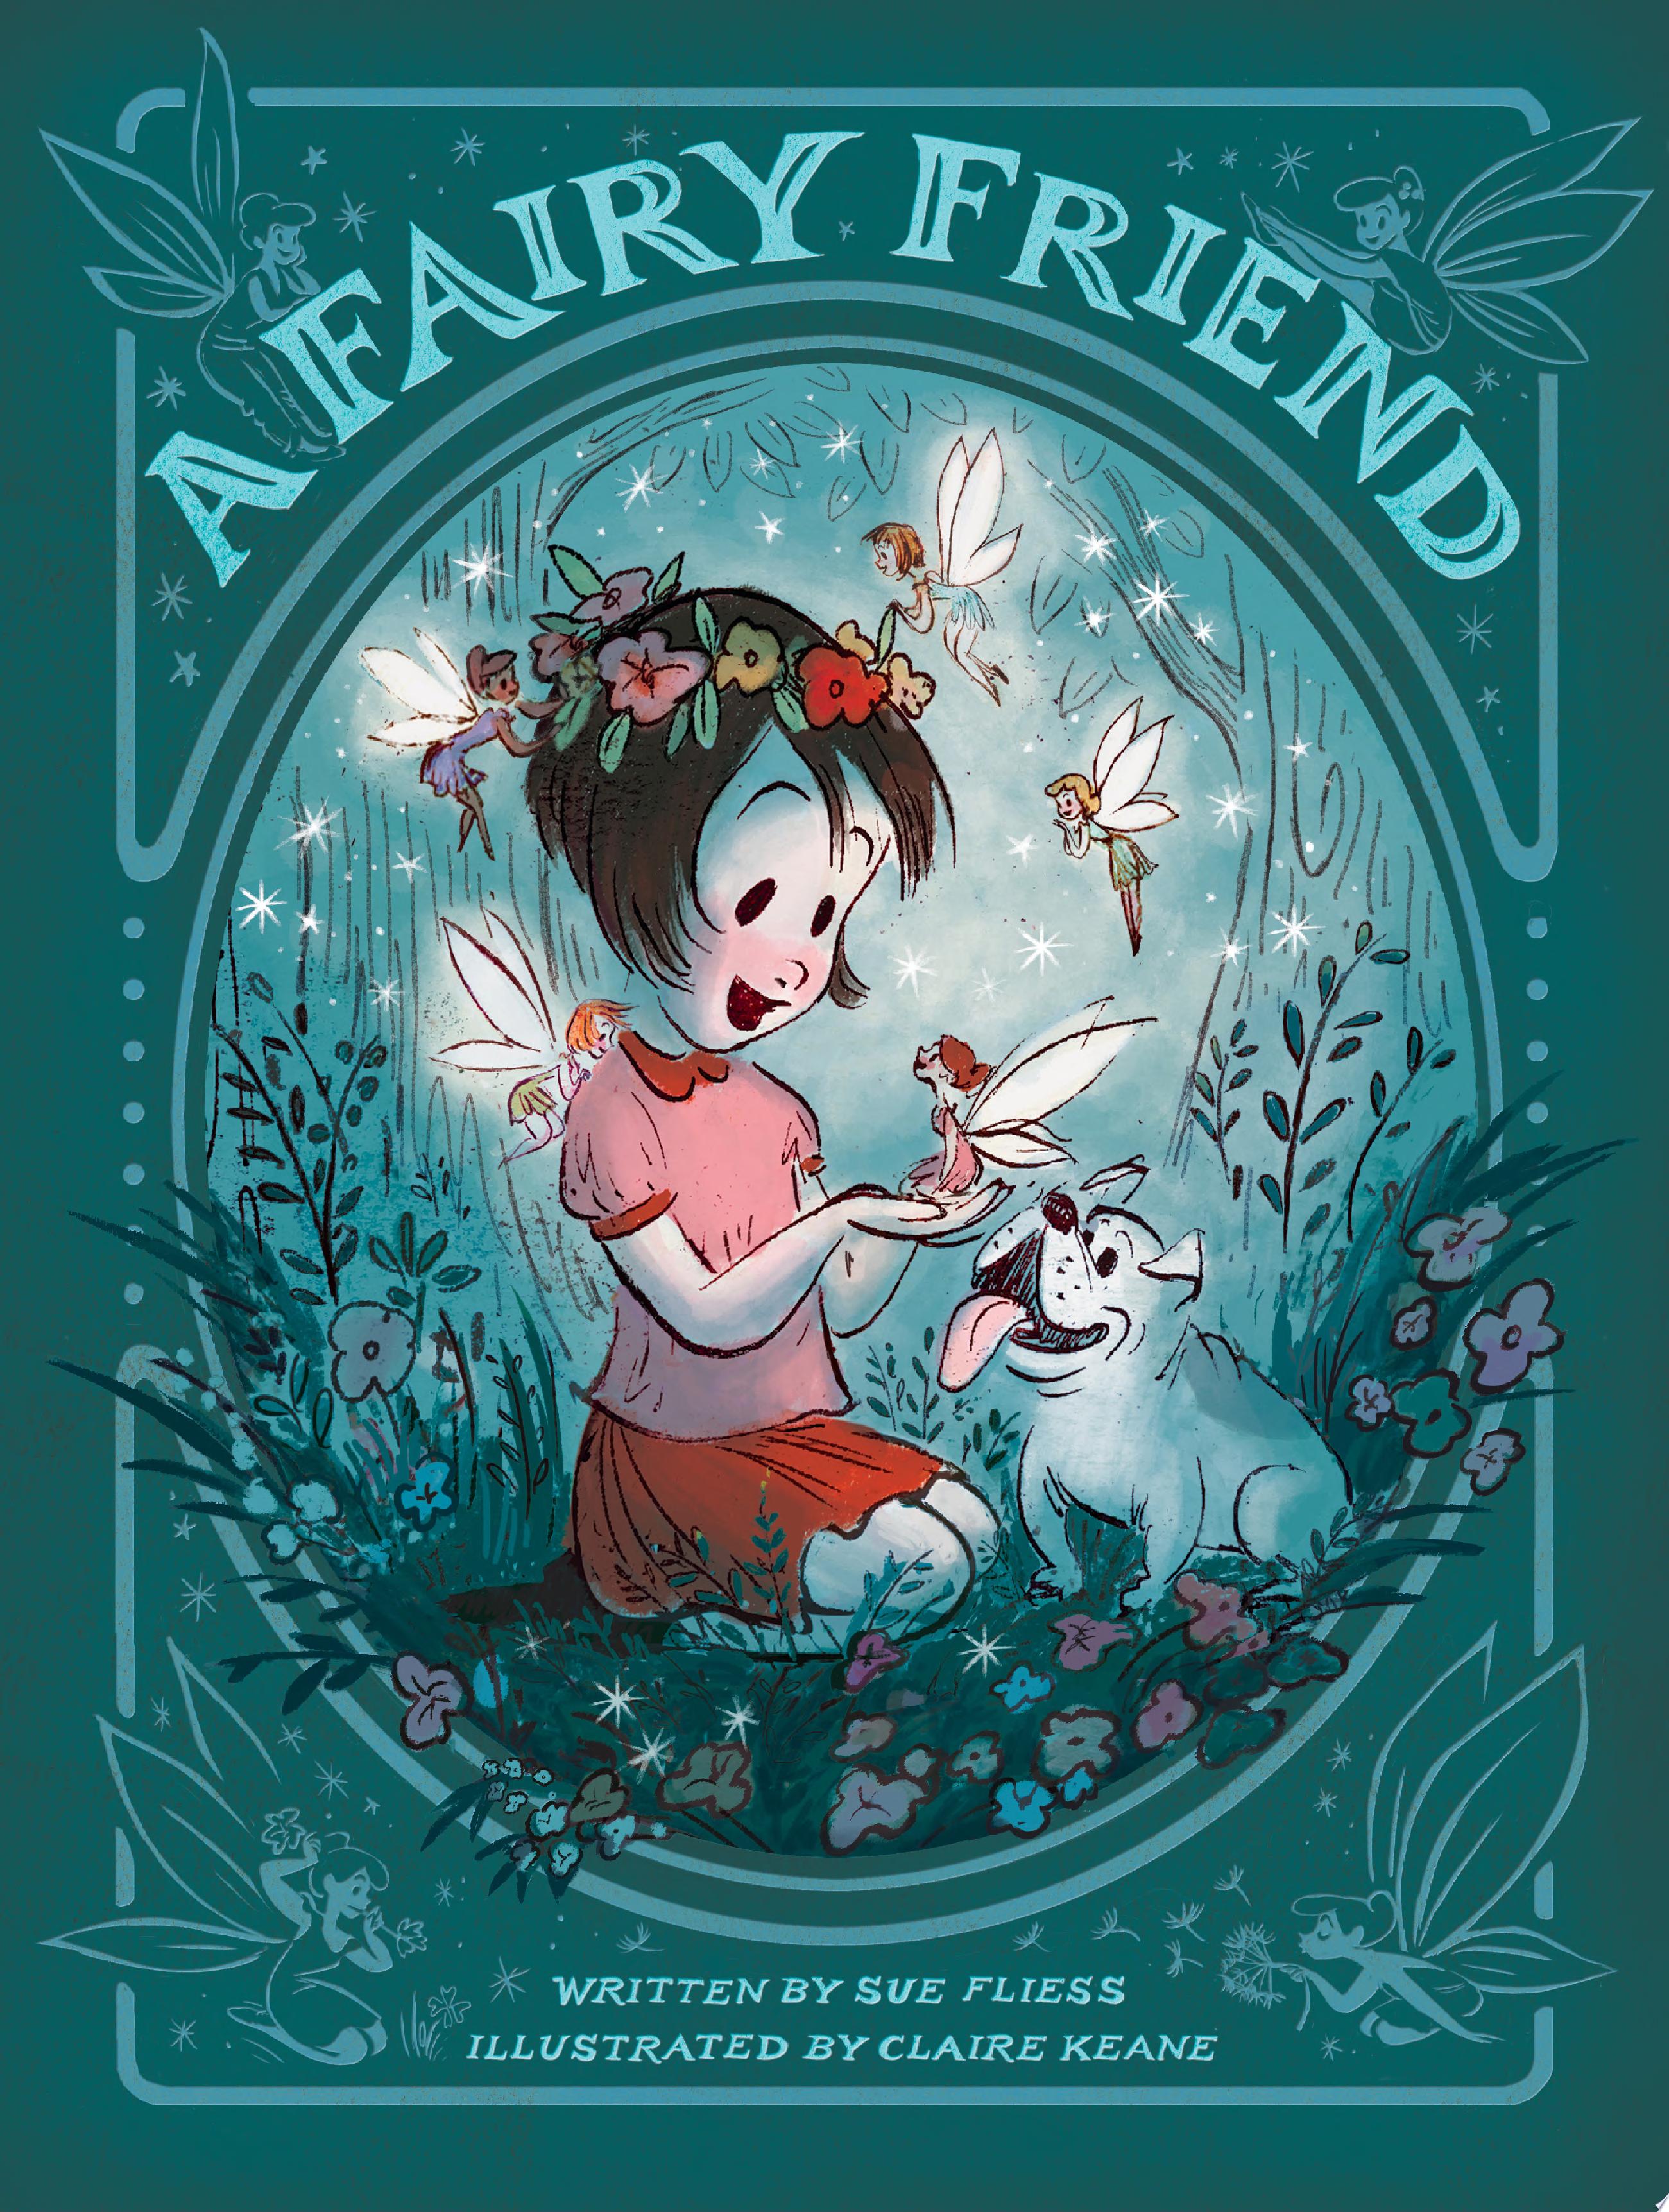 Image for "A Fairy Friend"